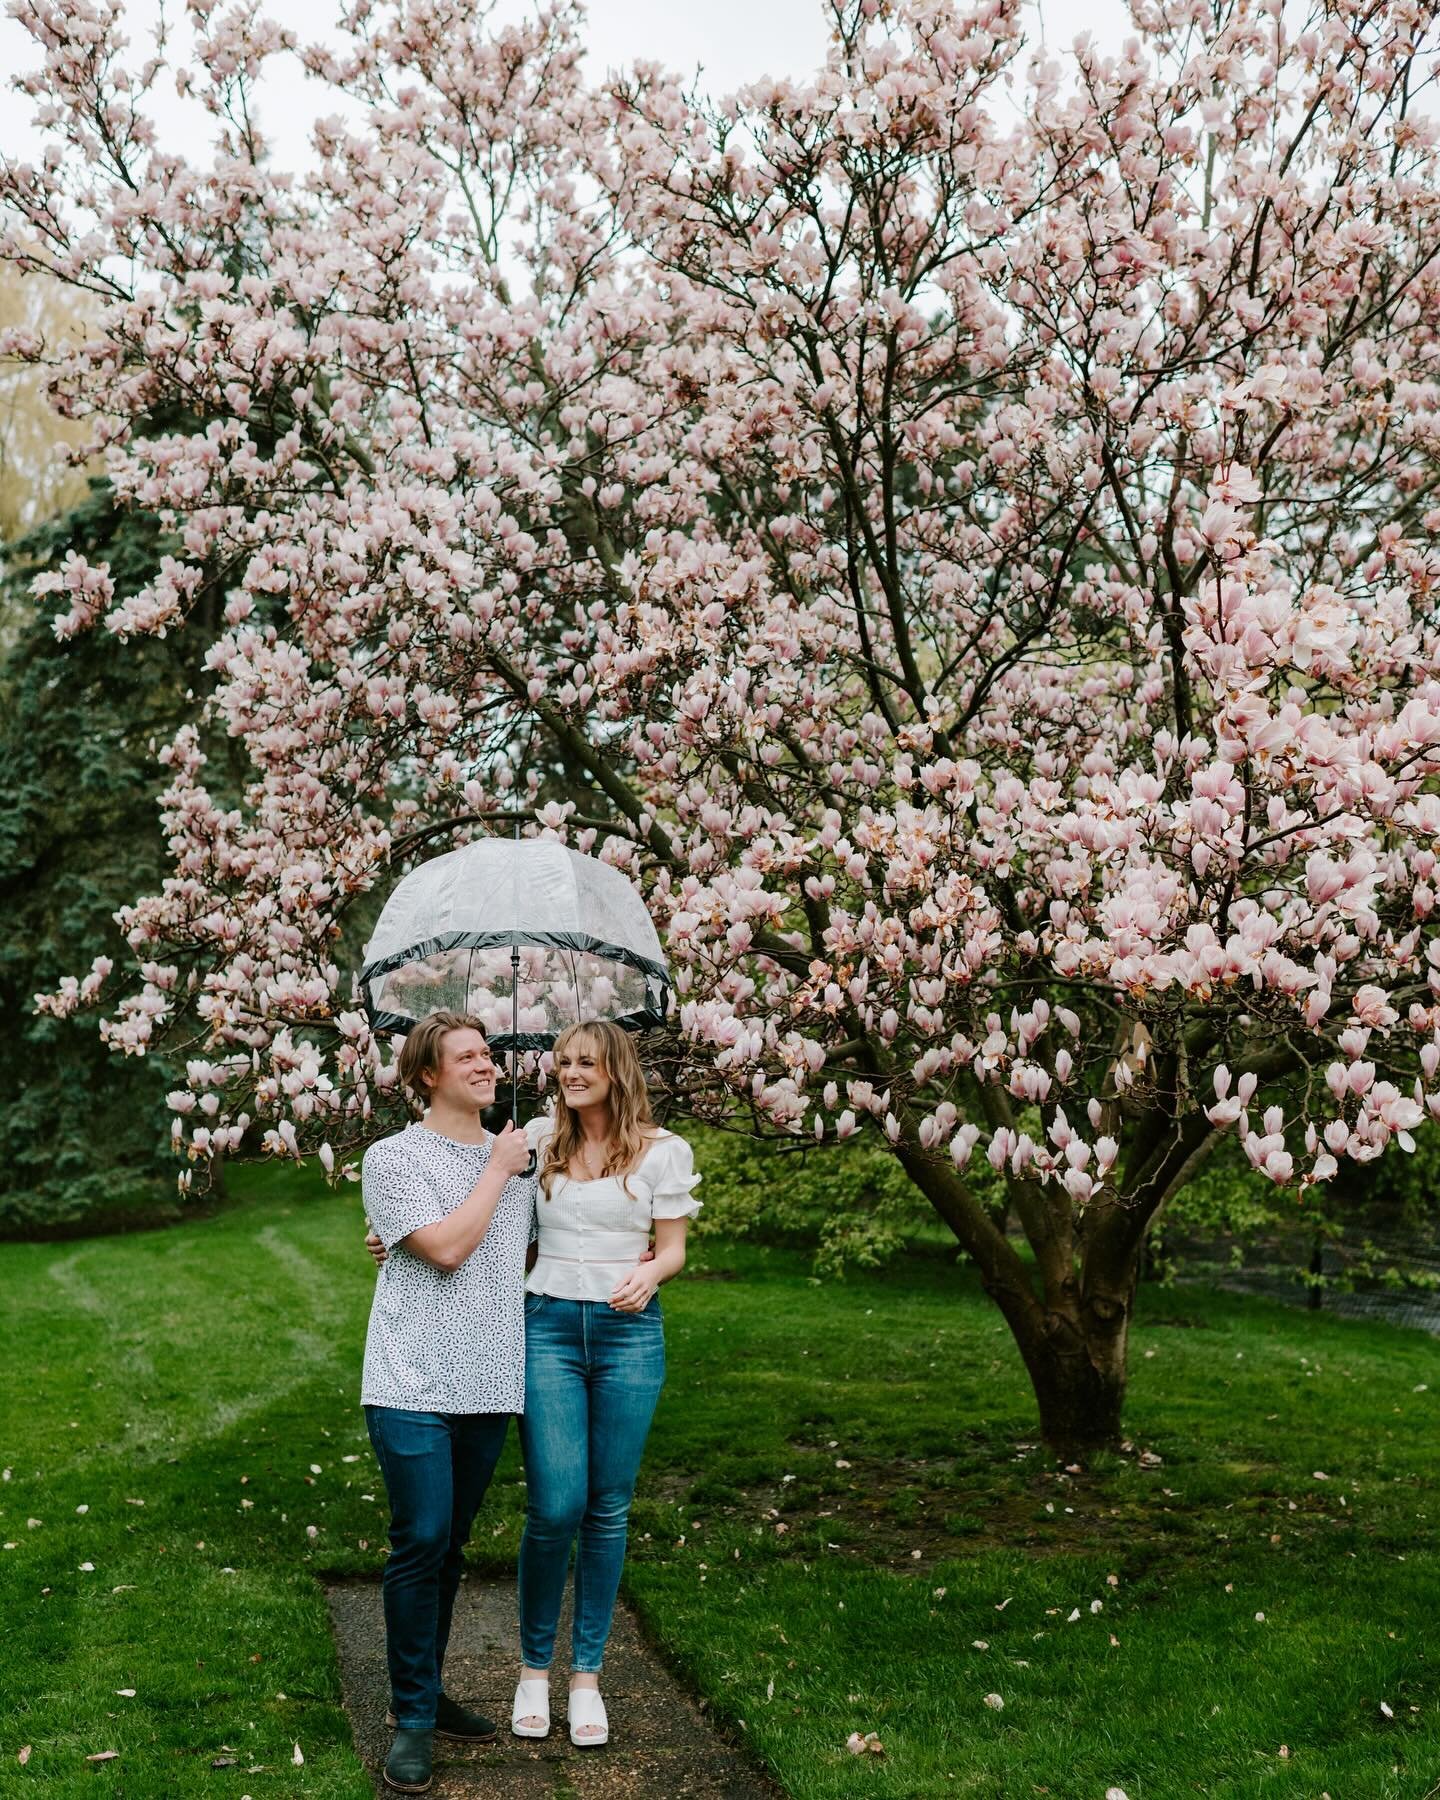 Slowly realizing that spring is becoming a favourite of mine 😍

#giuliamoltisantiphotography #torontoengagementphotographer #torontoengagementshoot #gtaweddingphotographer #torontoweddingphotographer